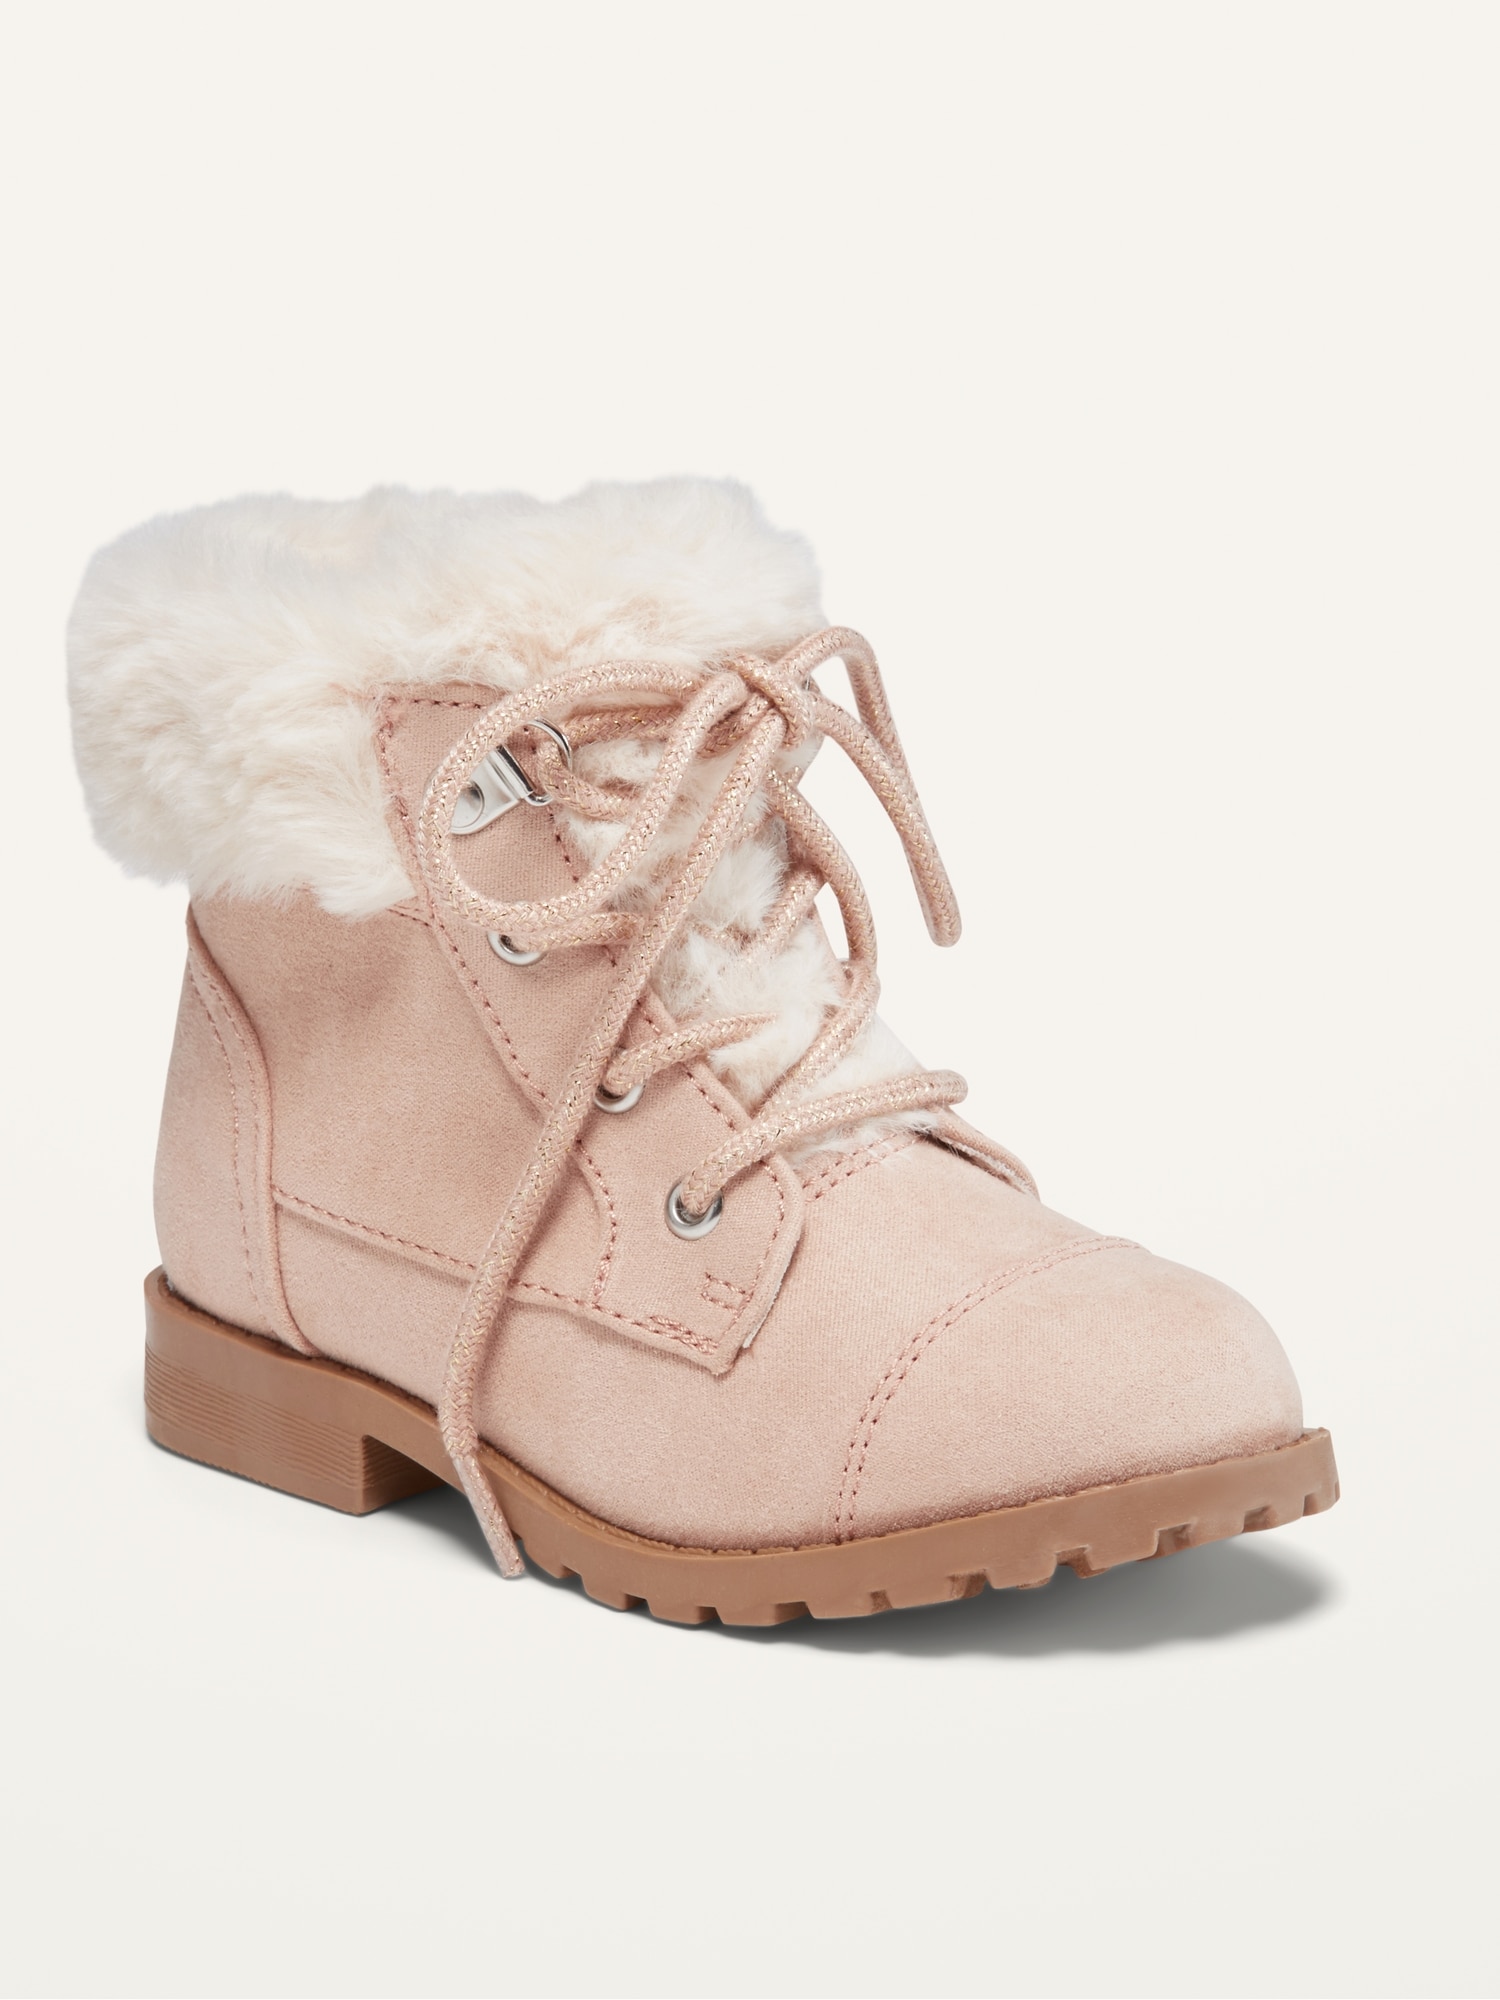 Faux-Fur-Lined Mid-Top Hiking Boots for 